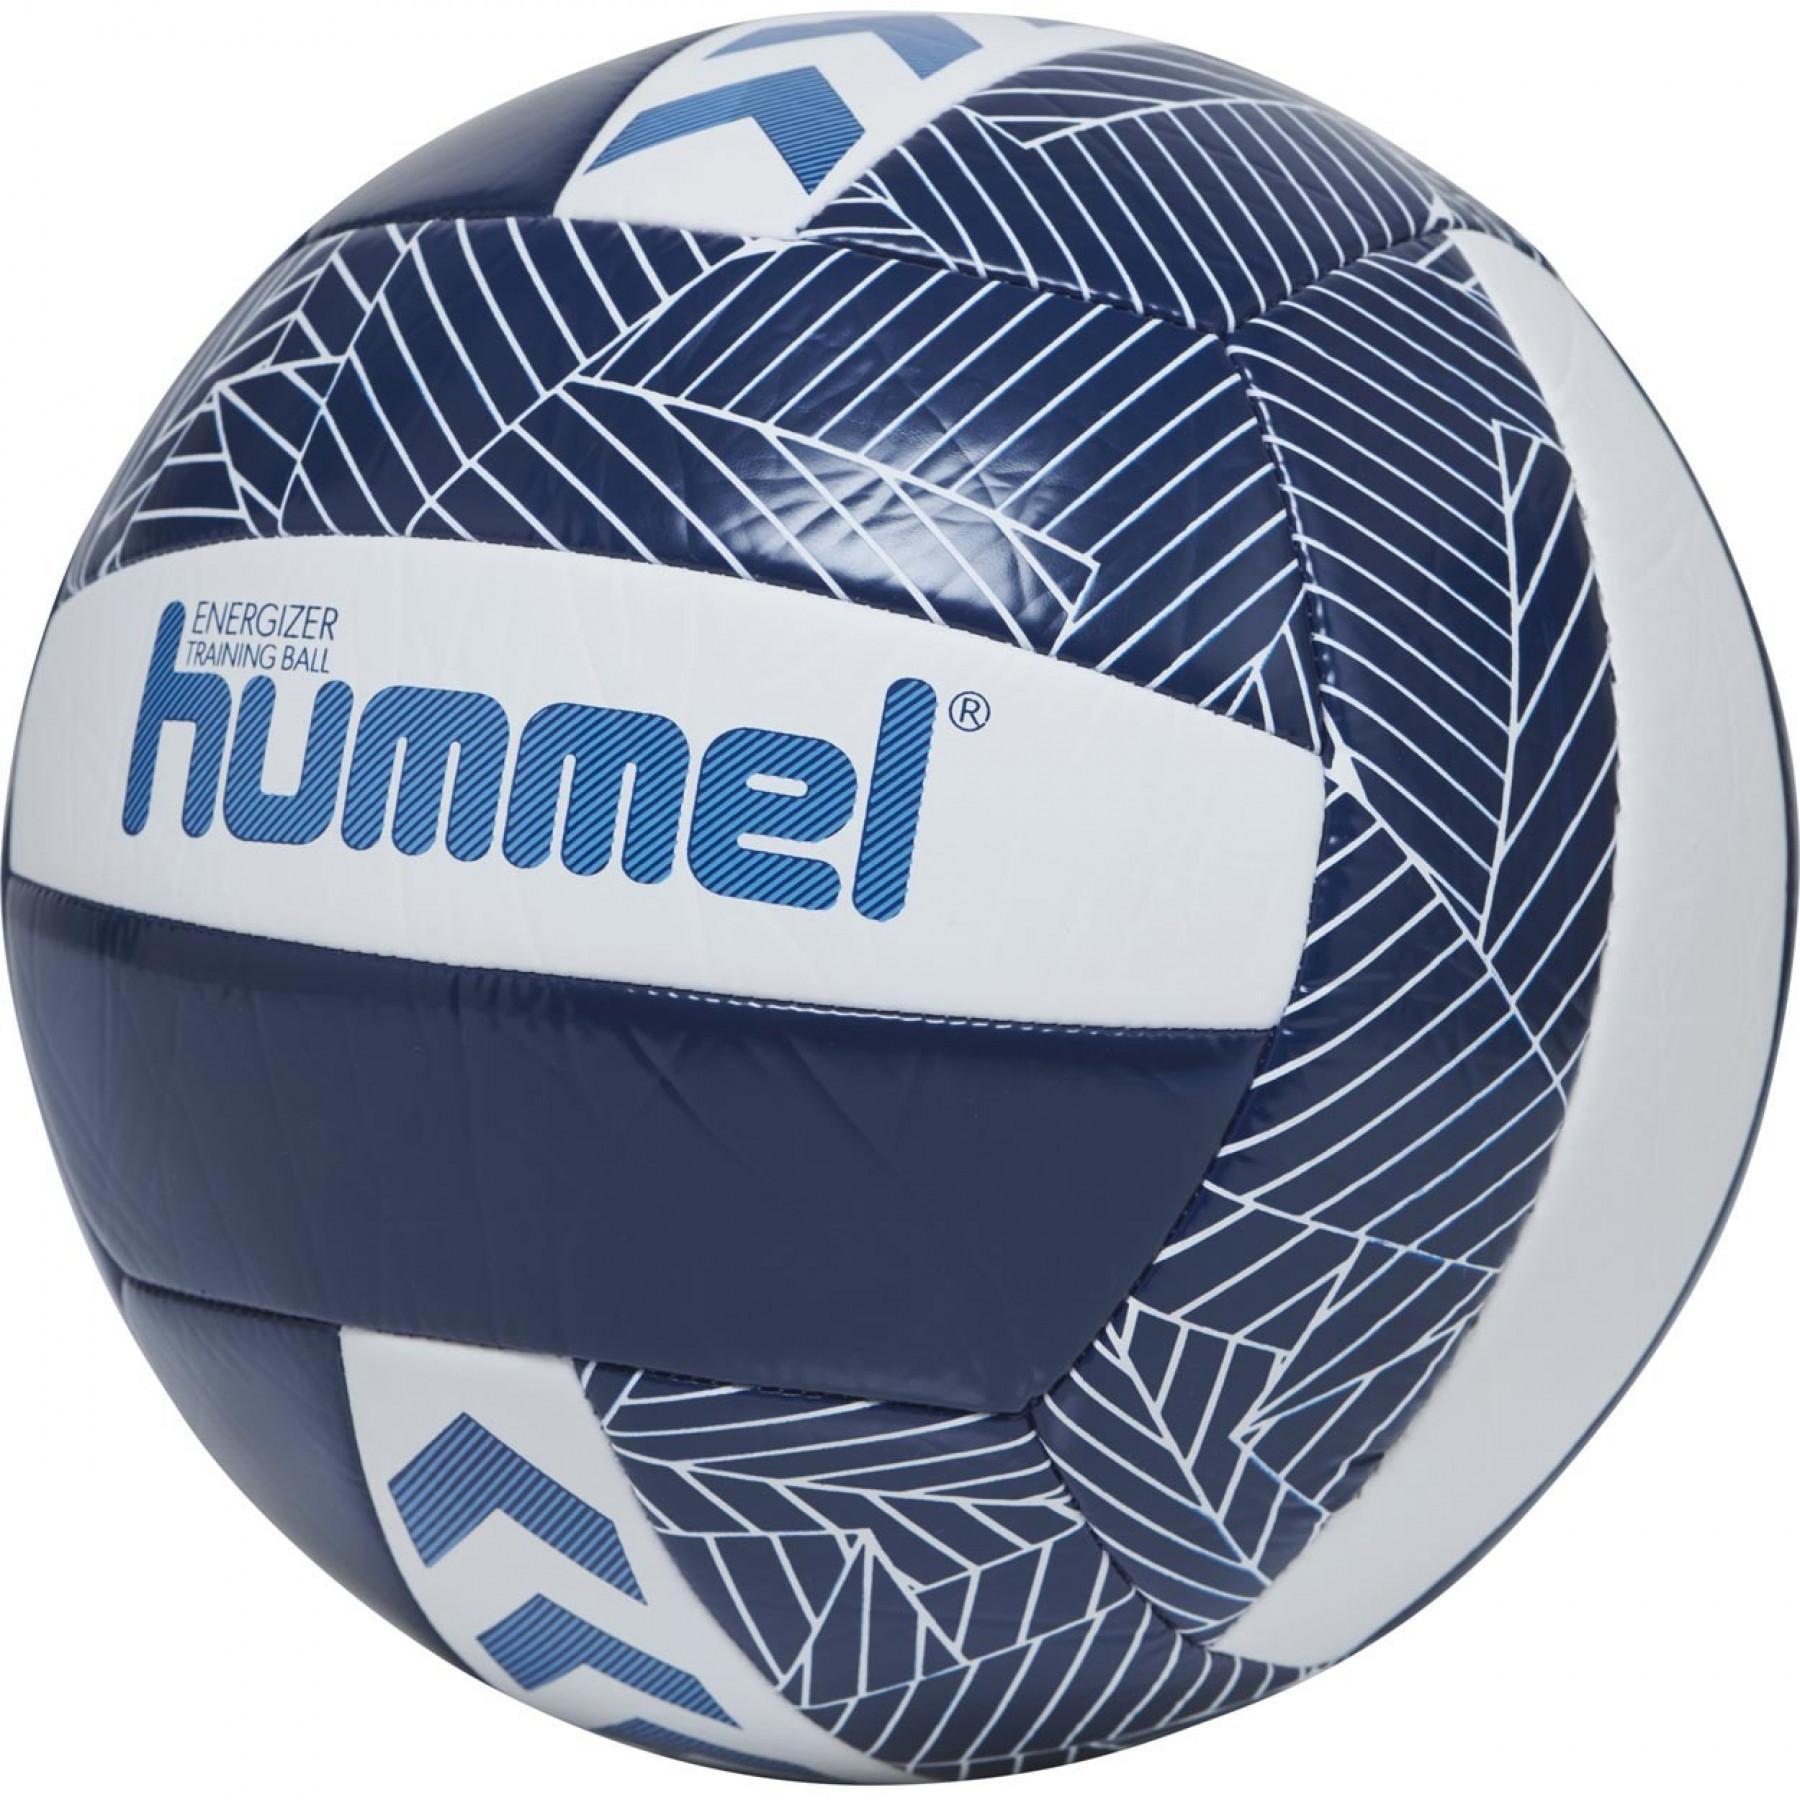 Set of 5 volleyballs Hummel Energizer [Taille5]